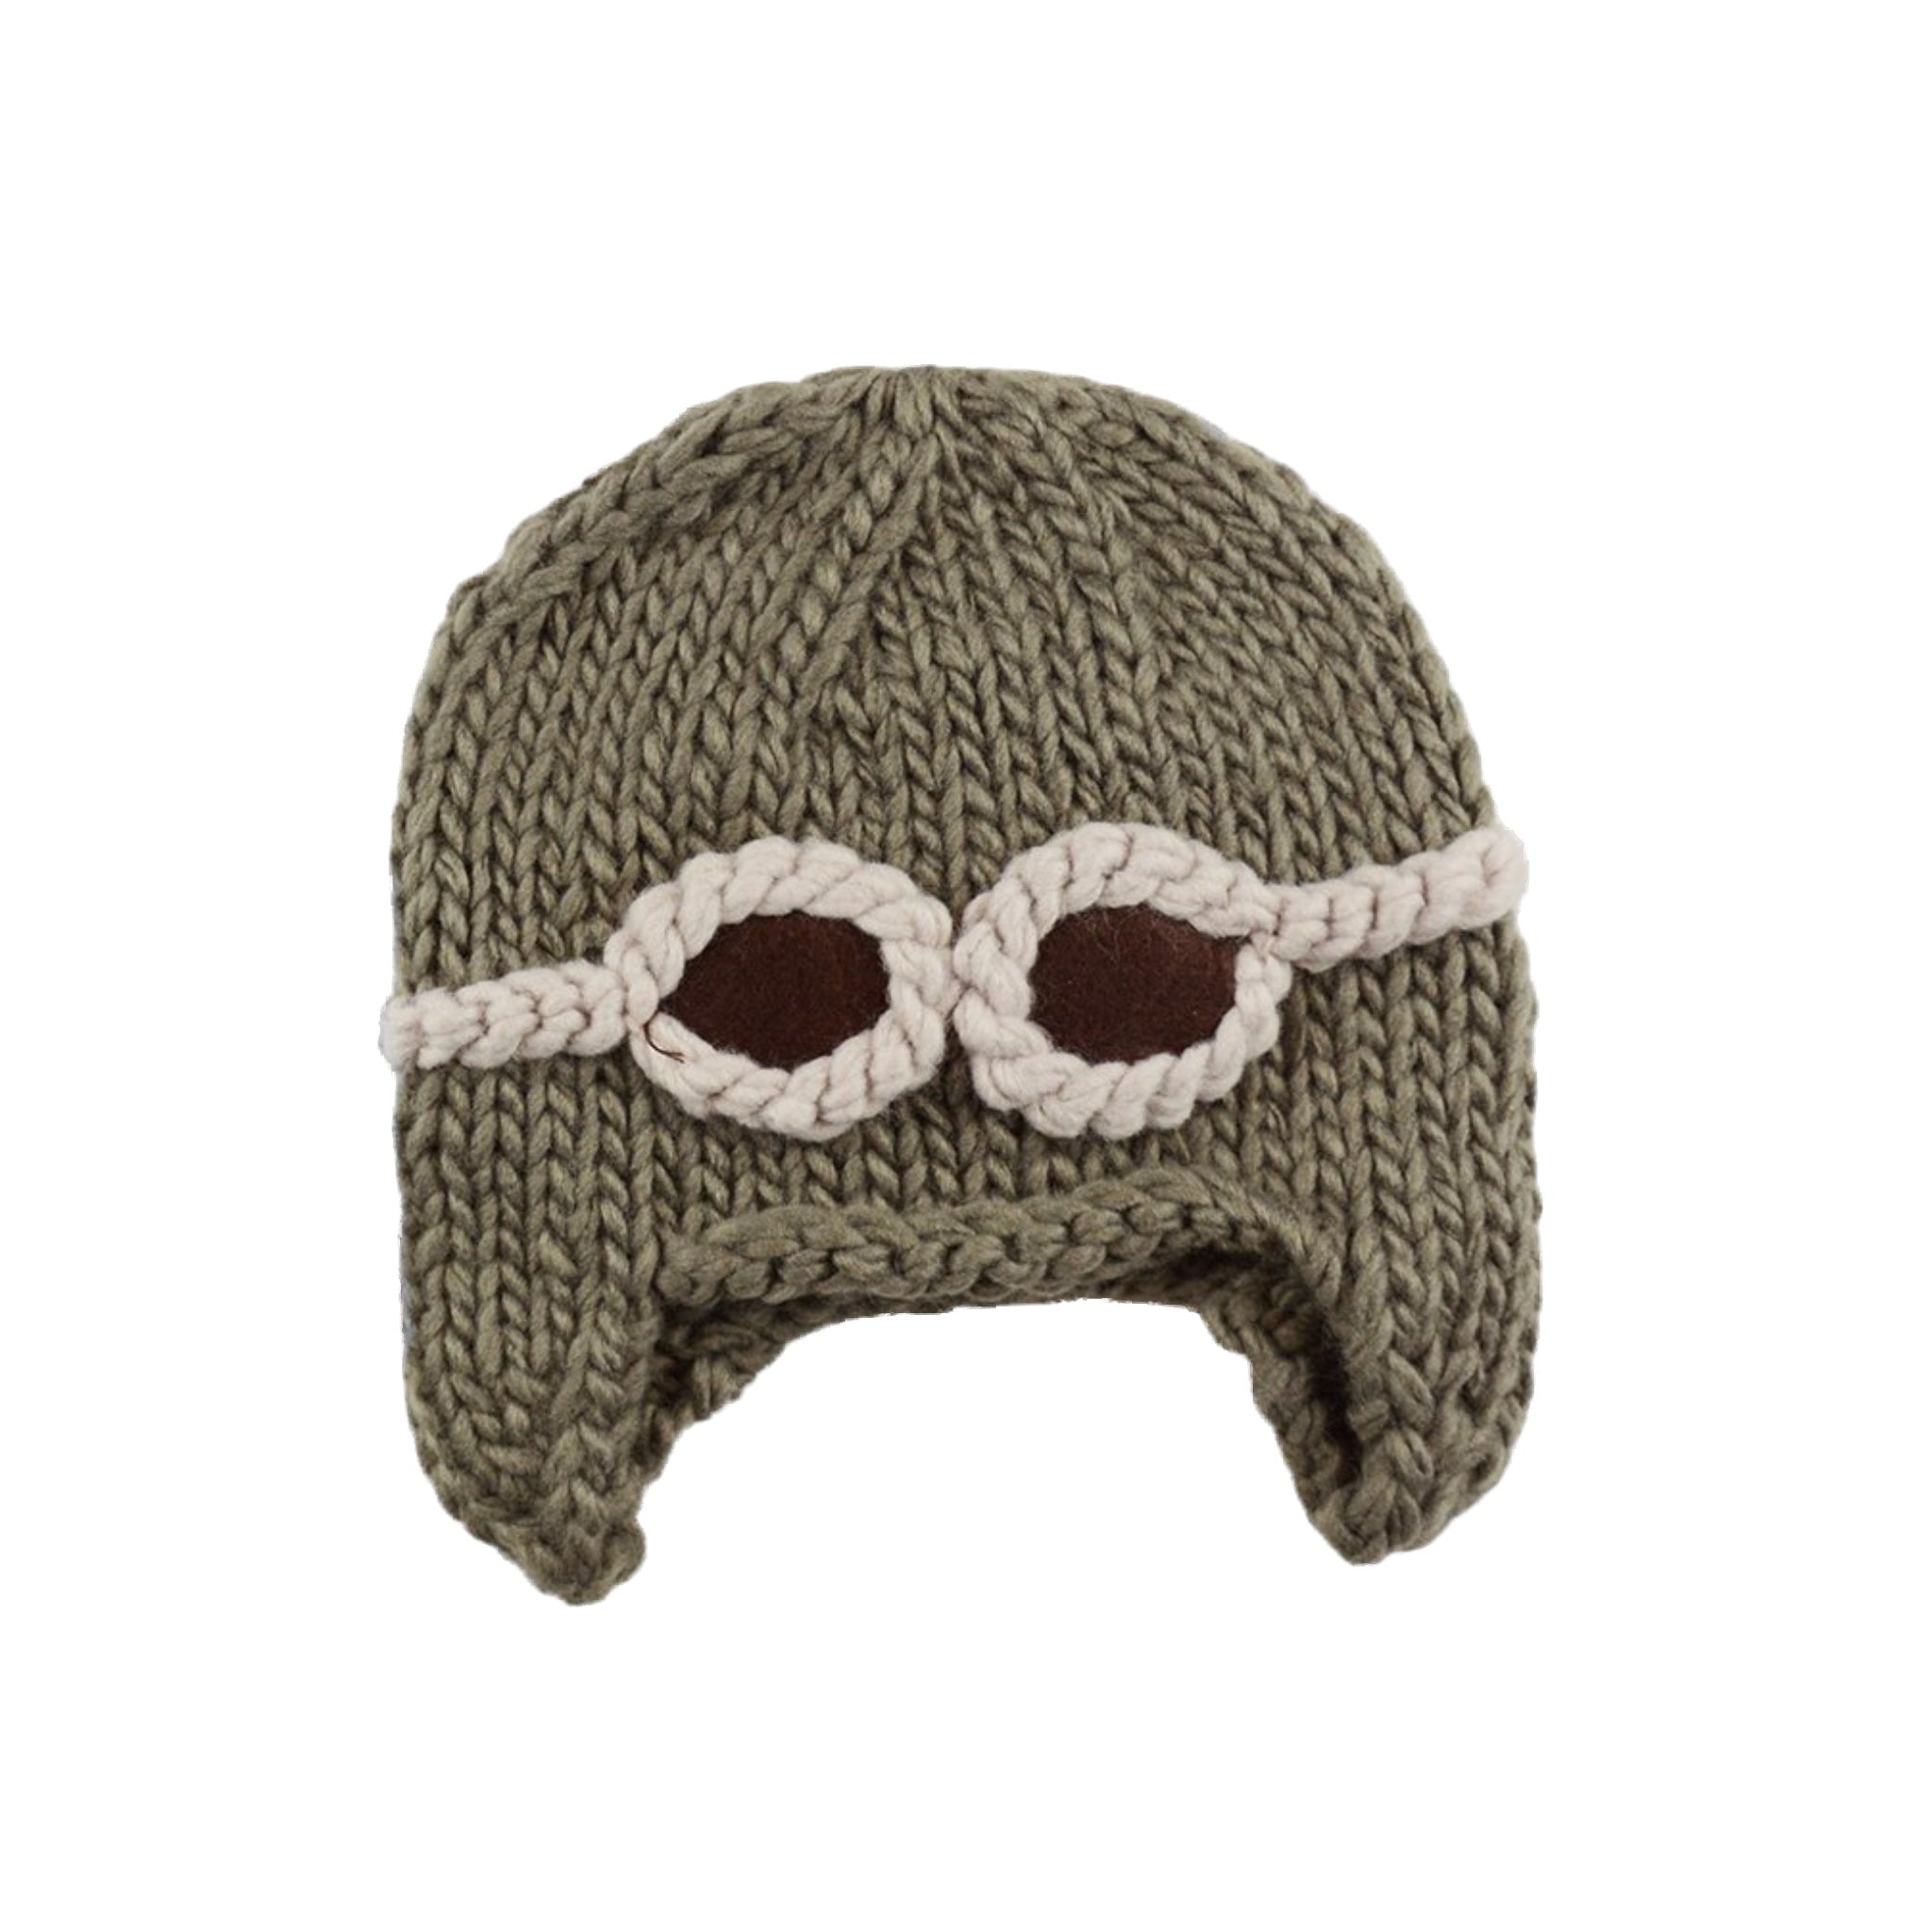 The Blueberry Hill Wilbur Aviator with Goggles Knit Hat